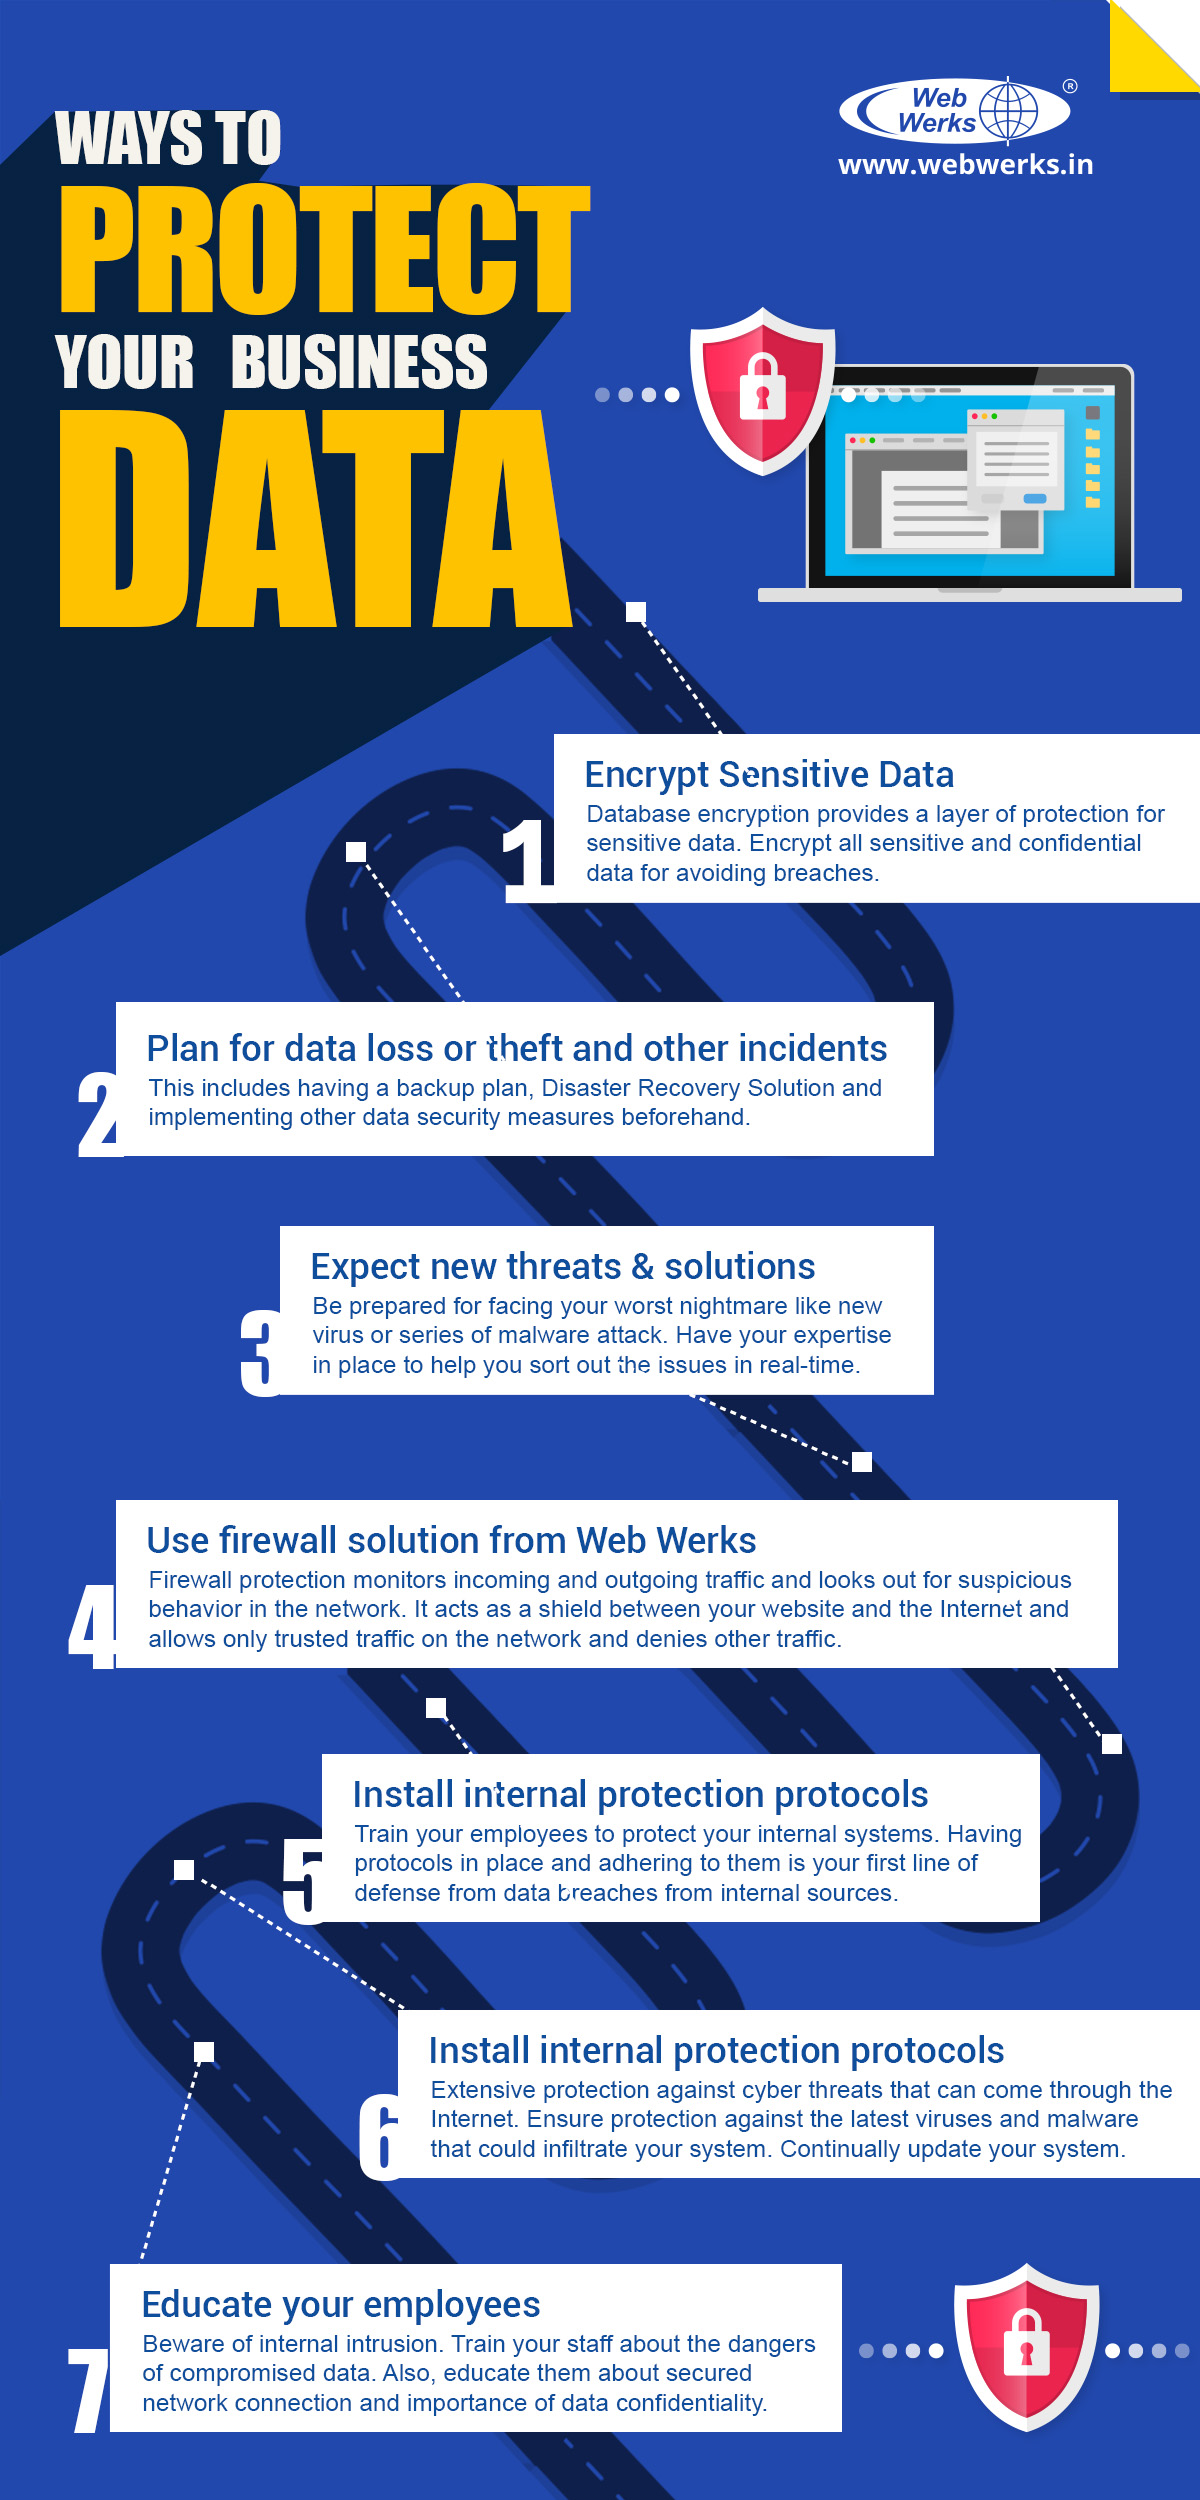 Ways to protect business data 